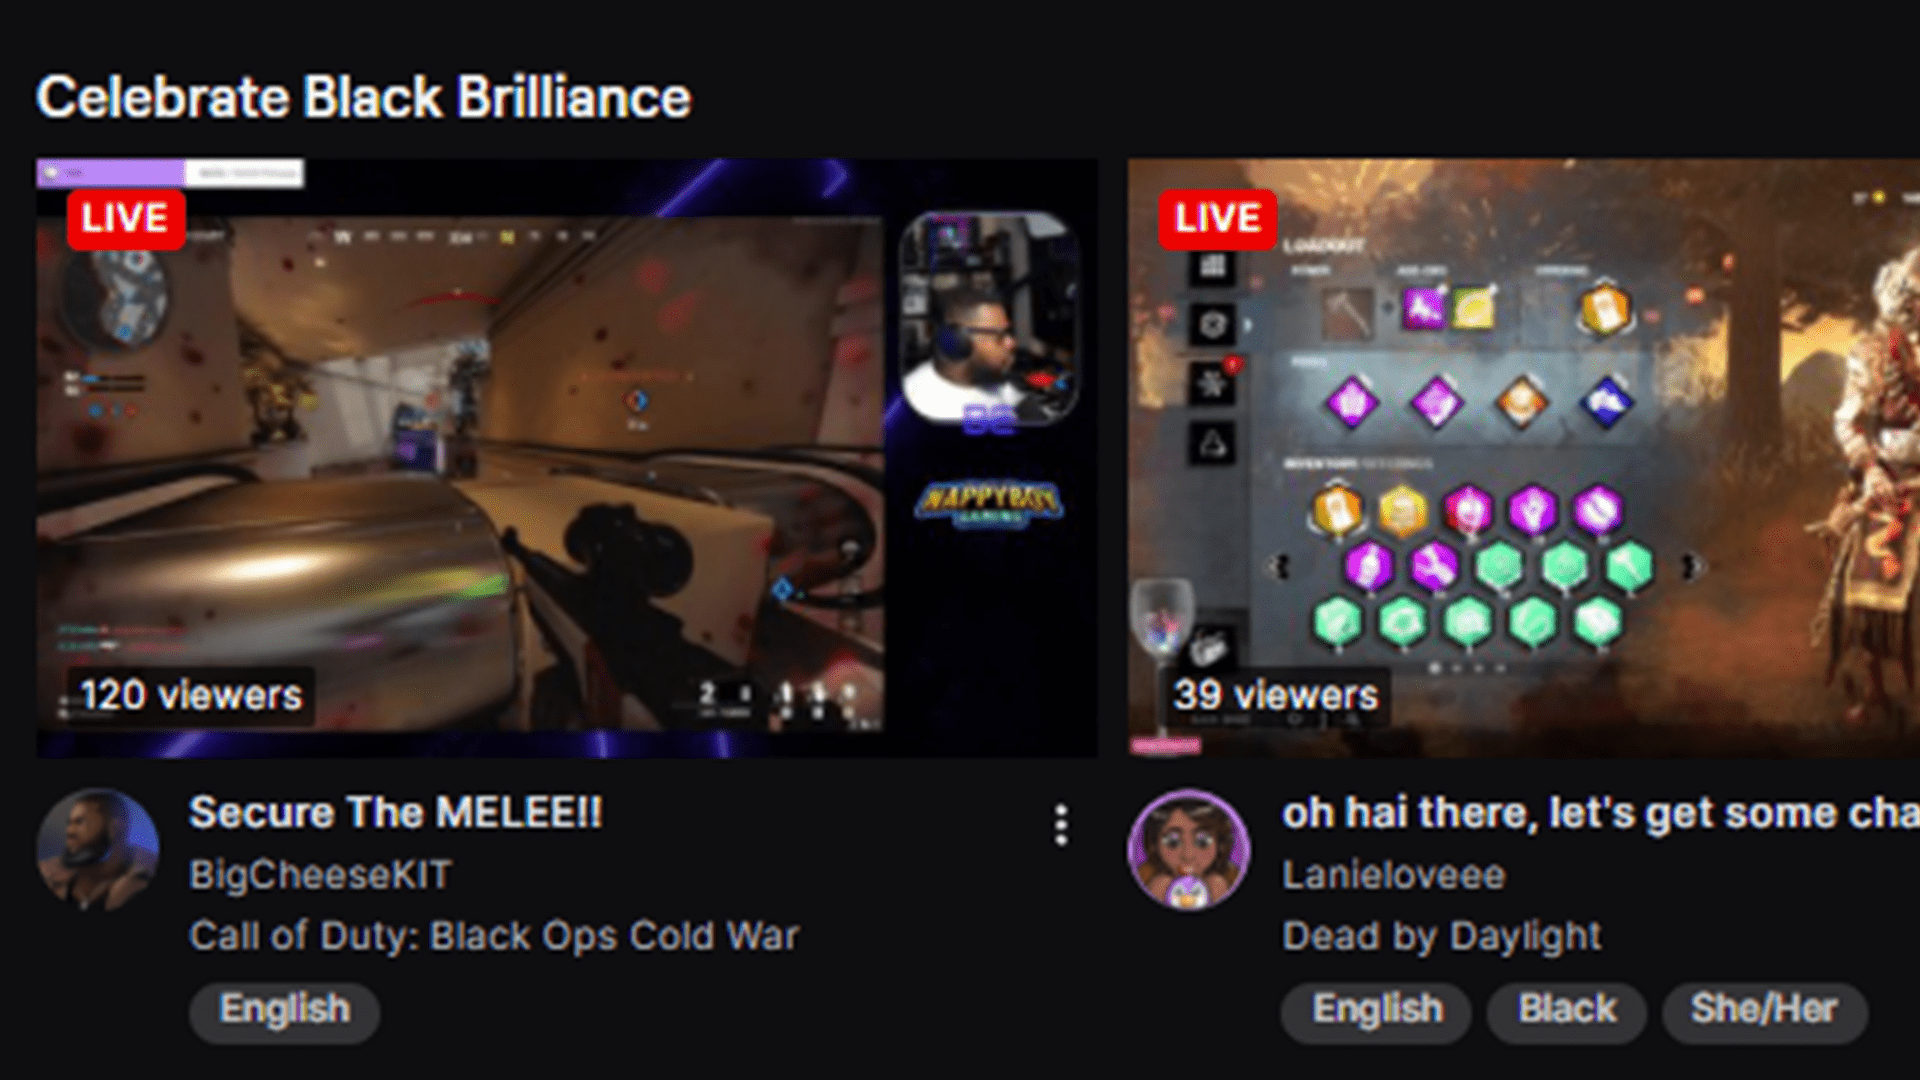 The Black Brilliance tab on Twitch's front page. 